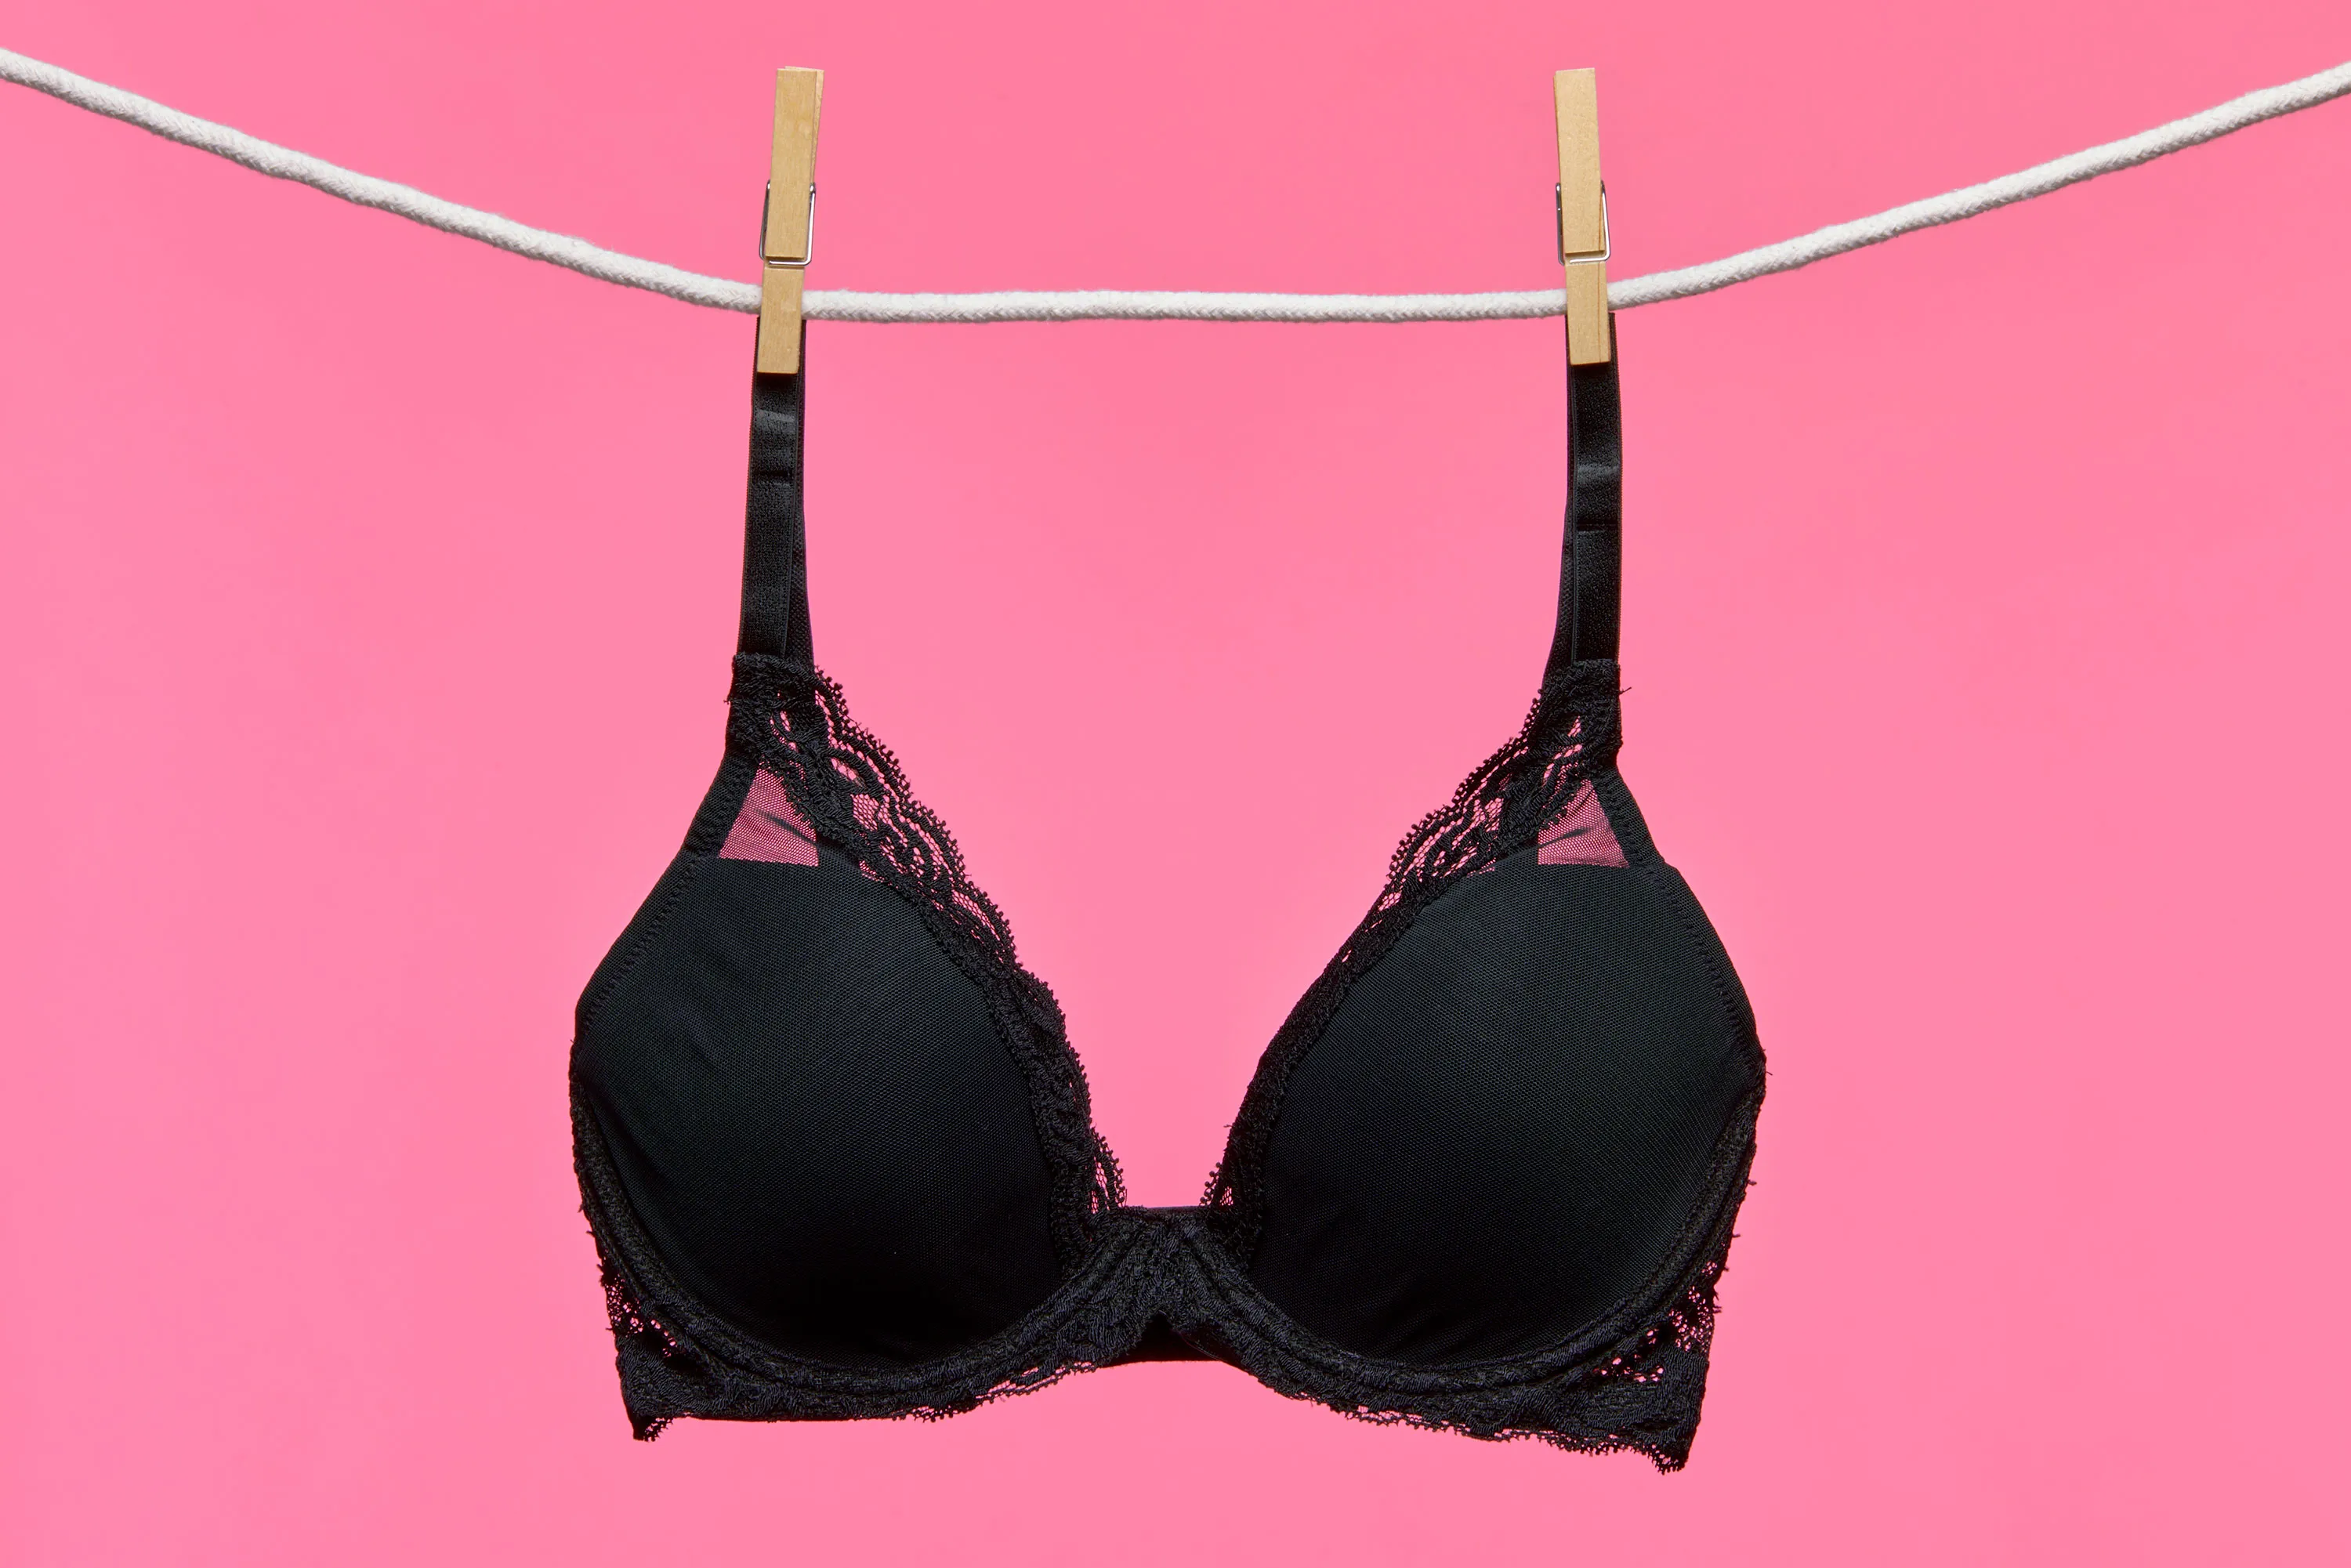 How To Make A Bra Out Of Underwear